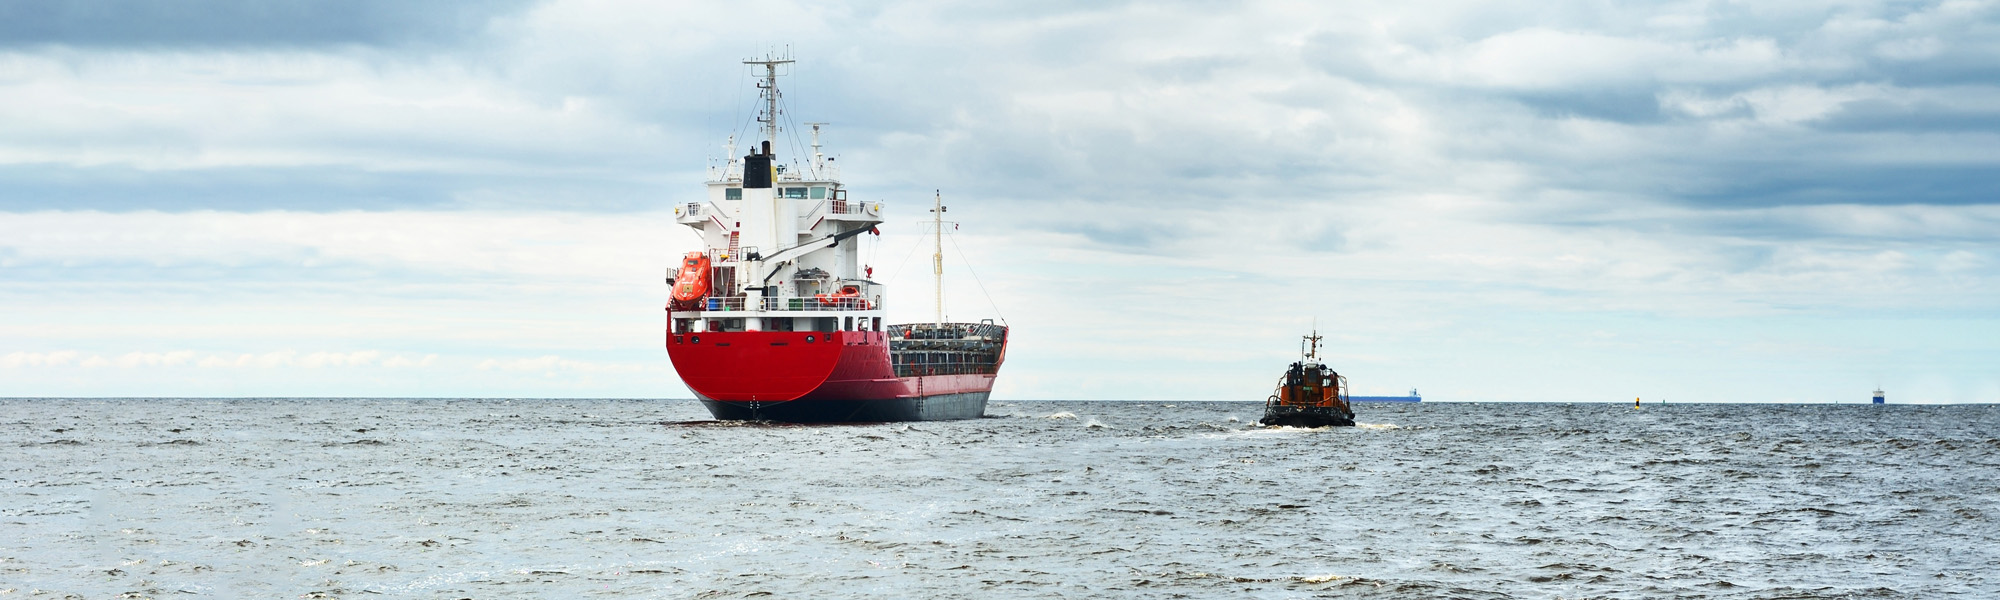 general cargo ship next to a tugboat in a open sea